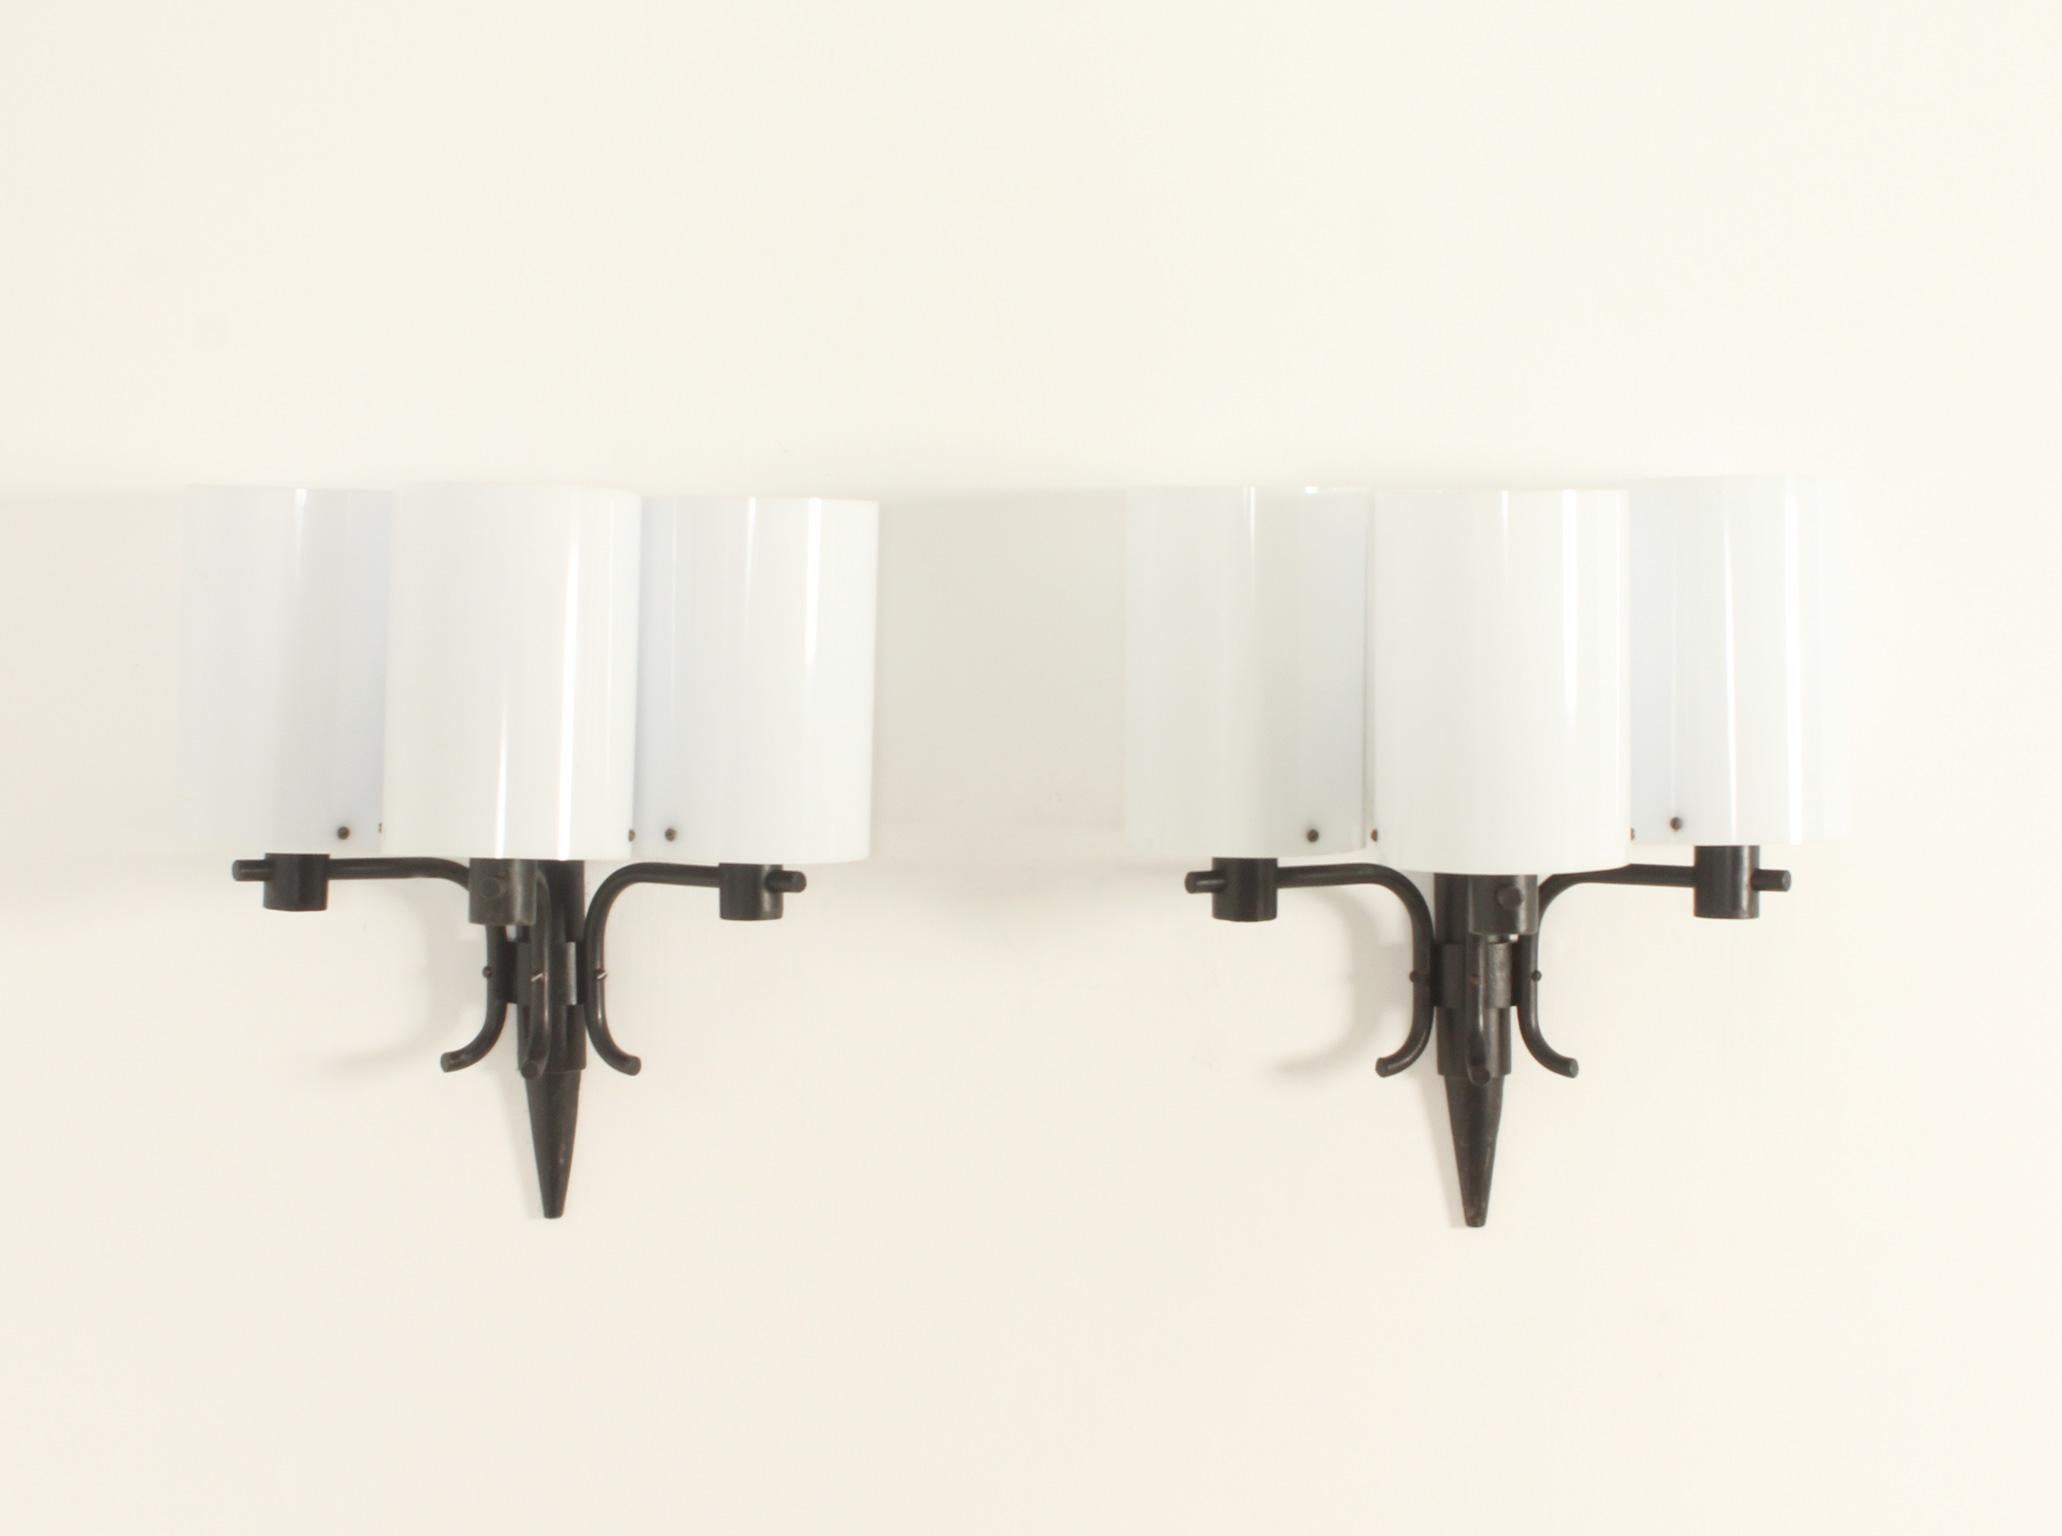 Mid-20th Century Pair of Sconces in Wrought Iron by Jordi Vilanova, Spain, 1960's For Sale